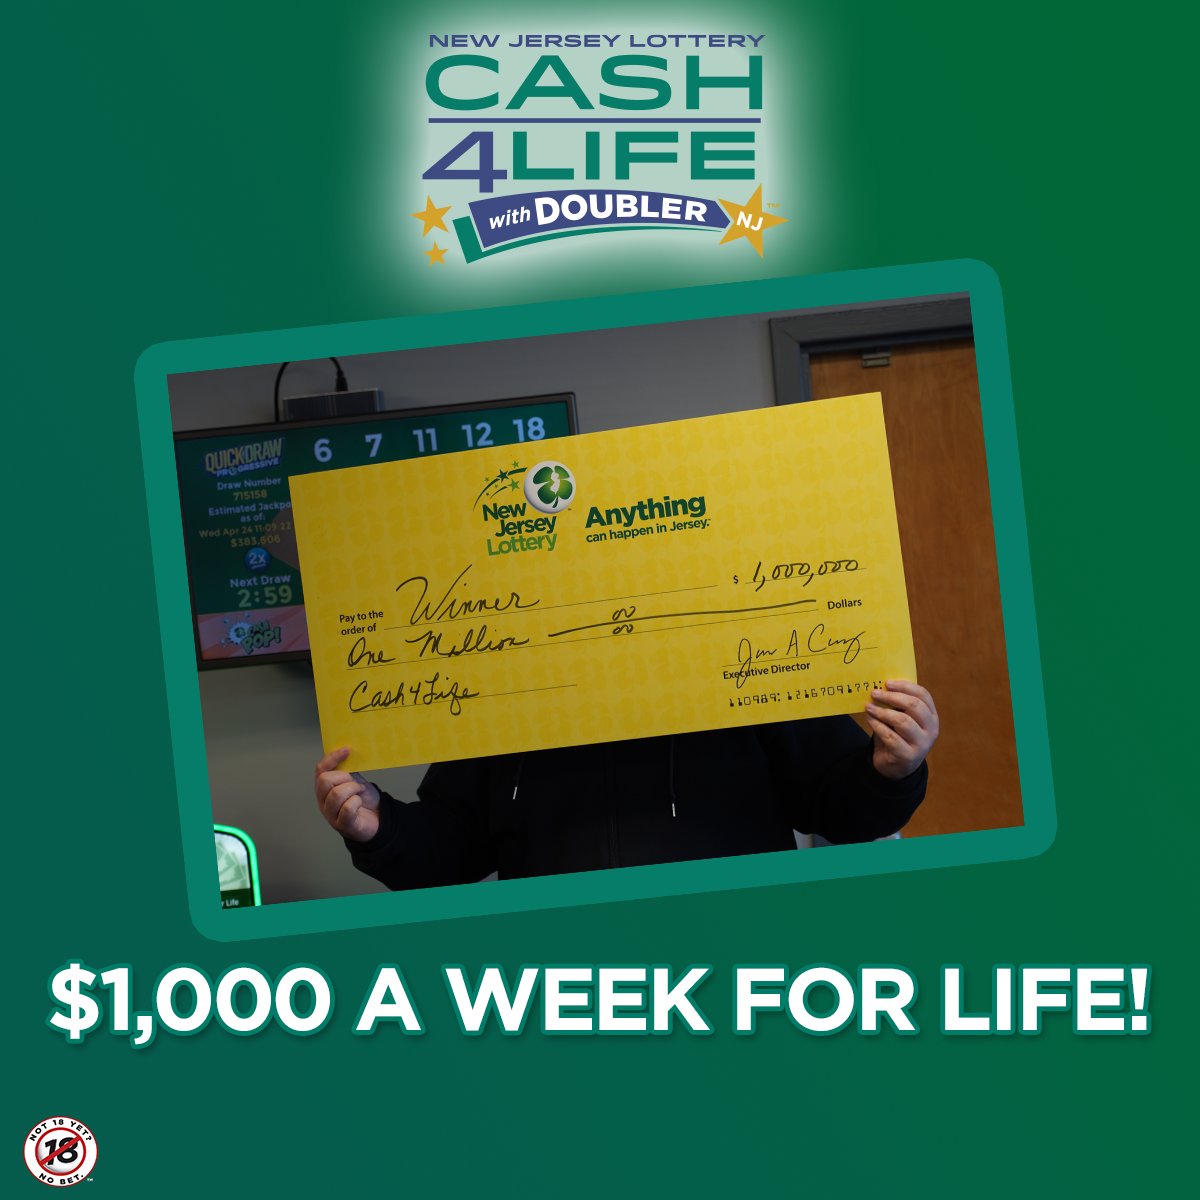 'Believe in miracles!' 🥠 Just days after getting this message in a fortune cookie, a lucky #NJLottery player hit the jackpot with a #CASH4LIFE ticket, winning $1,000 a week for life ($1,000,000 cash value)! 💰🎉For CASH4LIFE game odds, visit NJLottery.com/CASH4LIFE.